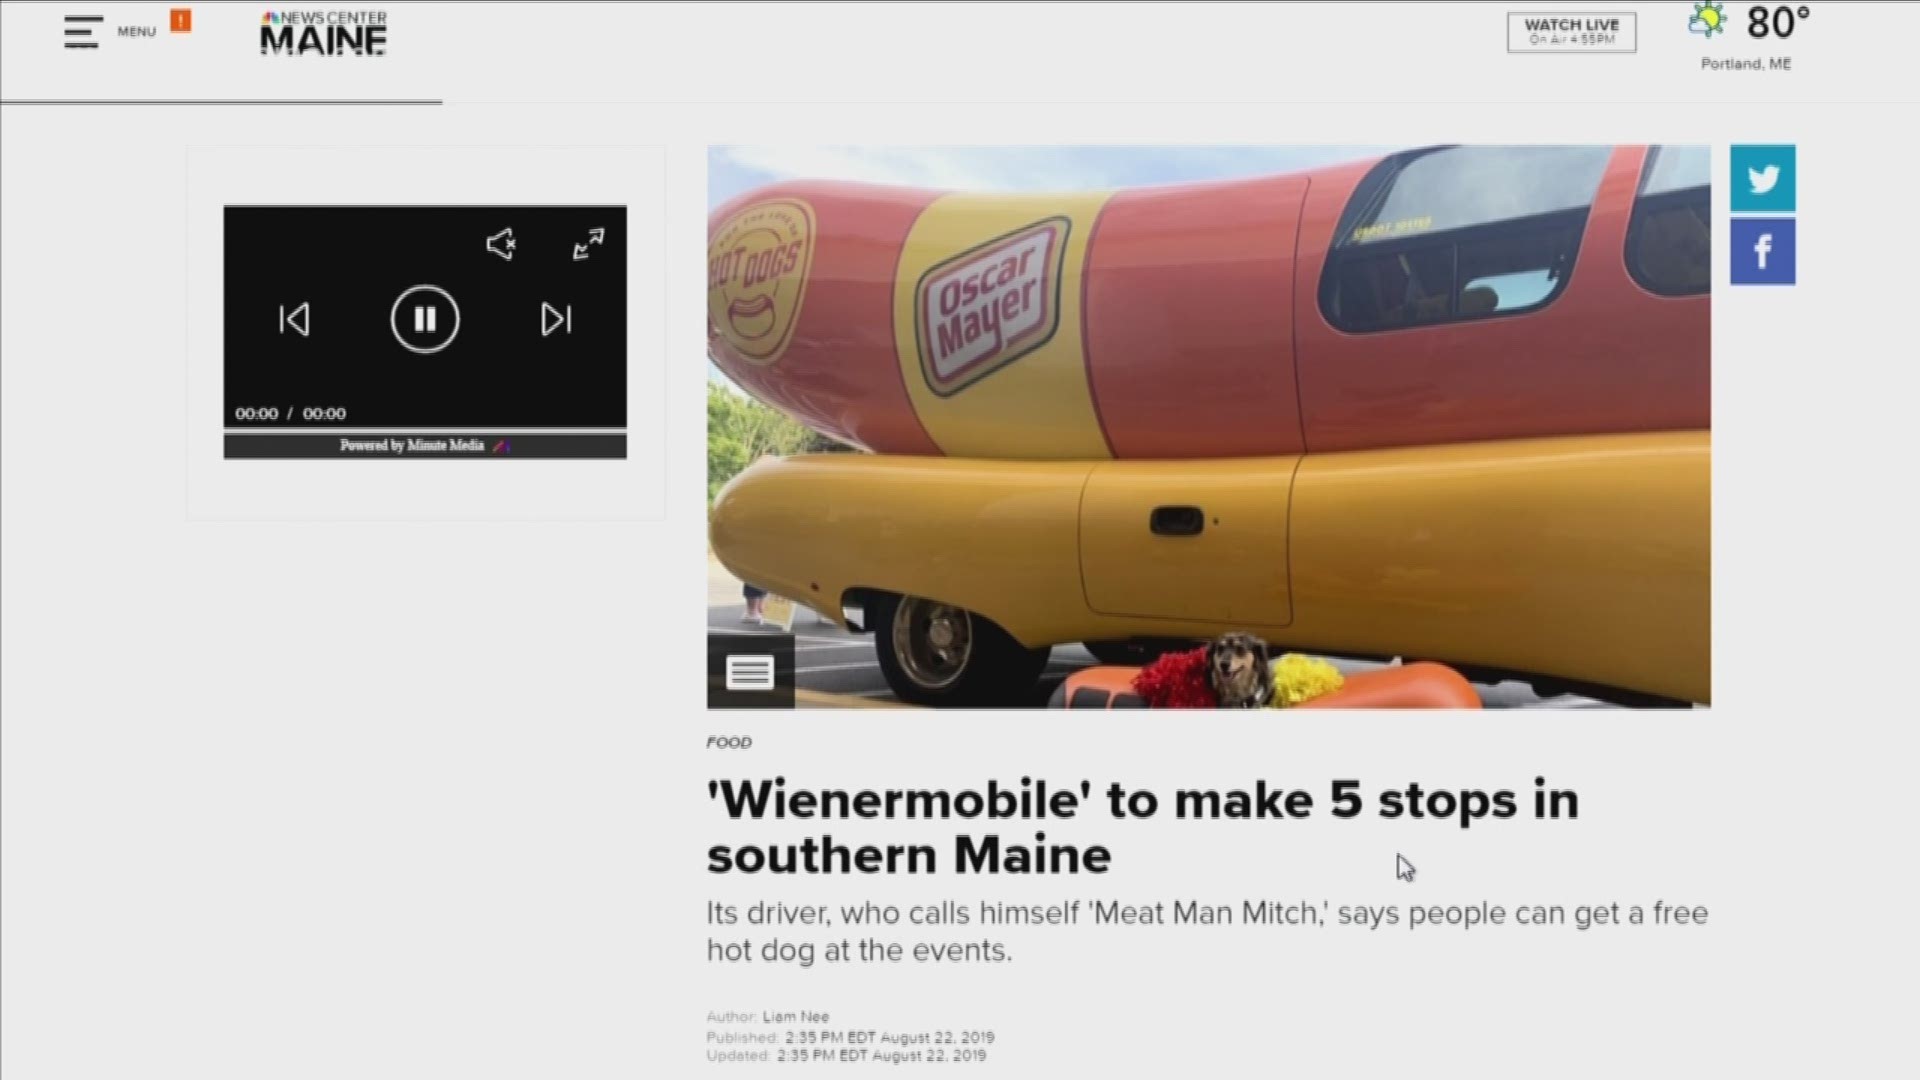 The Oscar Mayer hot-dog-on-wheels will be stopping in Cumberland, York, Androscoggin, and Oxford counties this weekend.